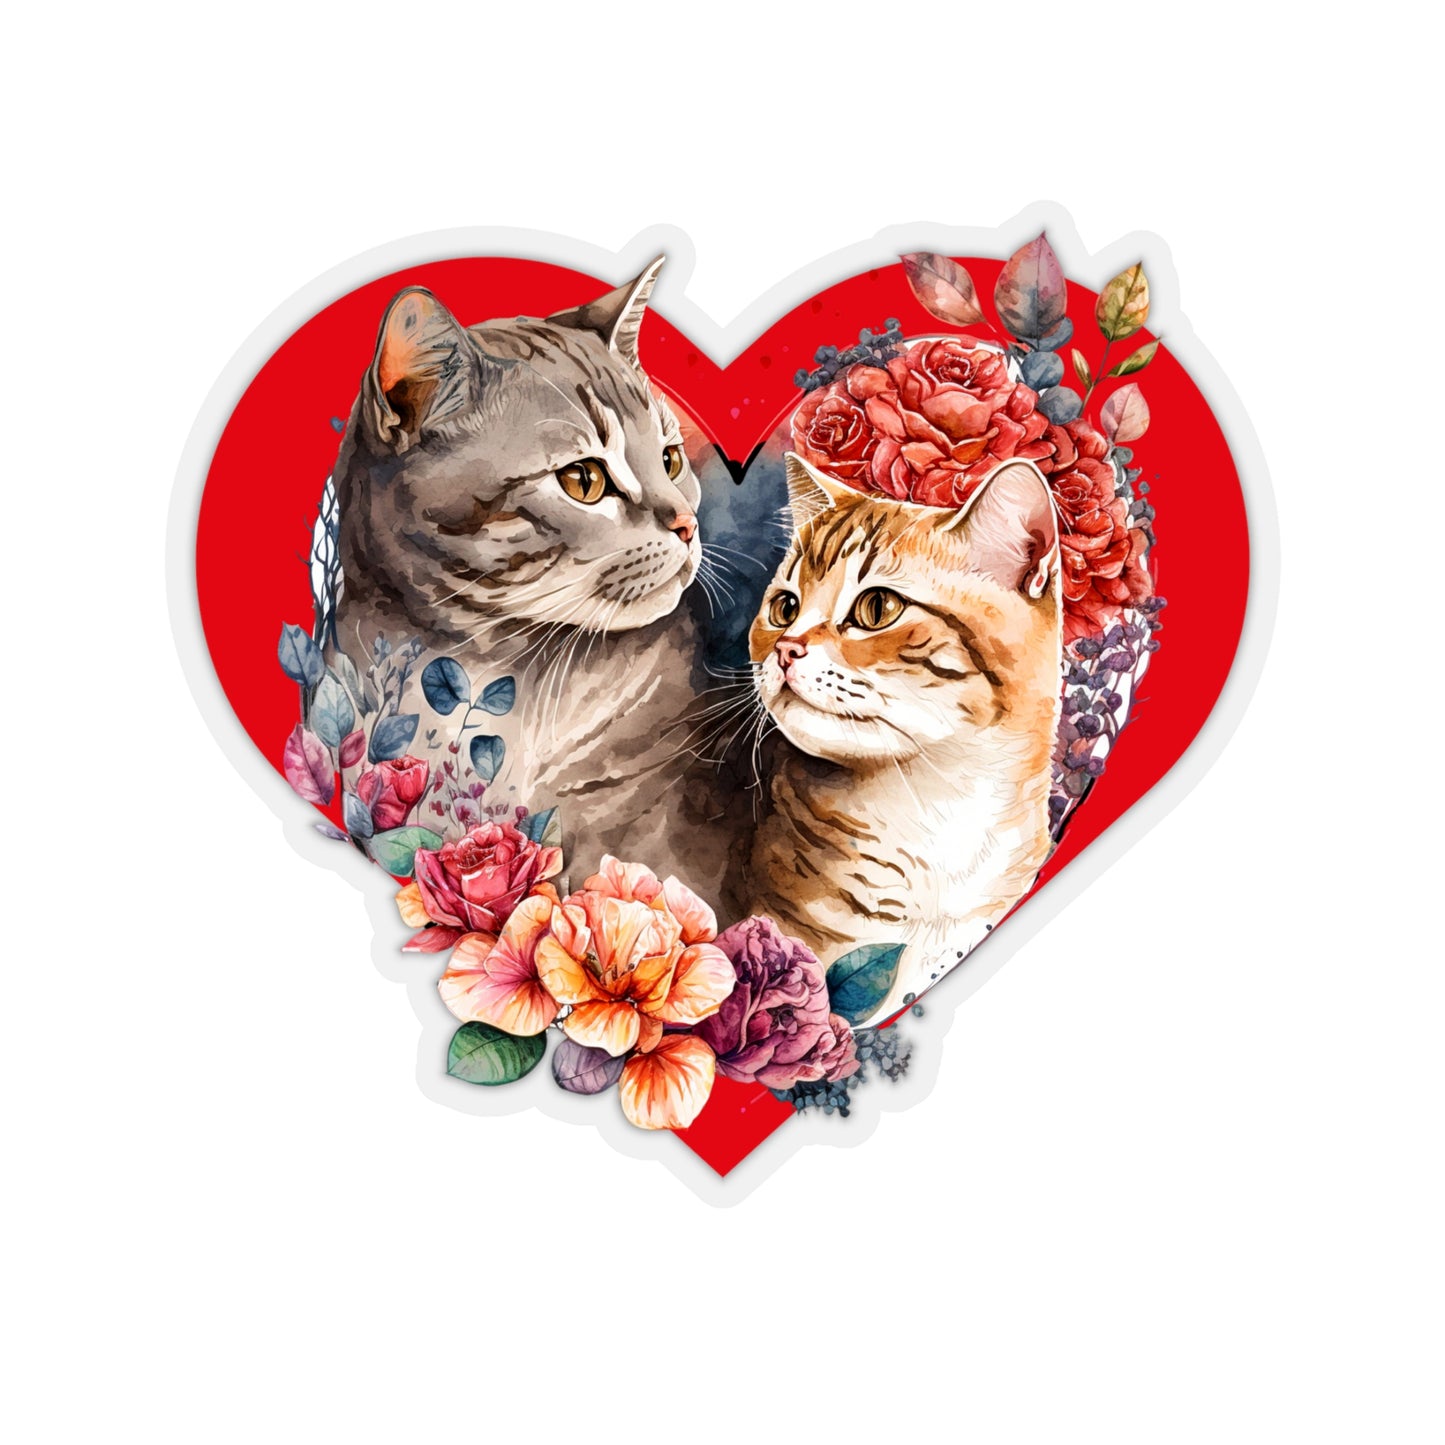 Lovely Kiss-Cut Stickers Valentines Day Romantic Cats Decorative Stickers for cards, Scrapbooks, gift tags, or on their own